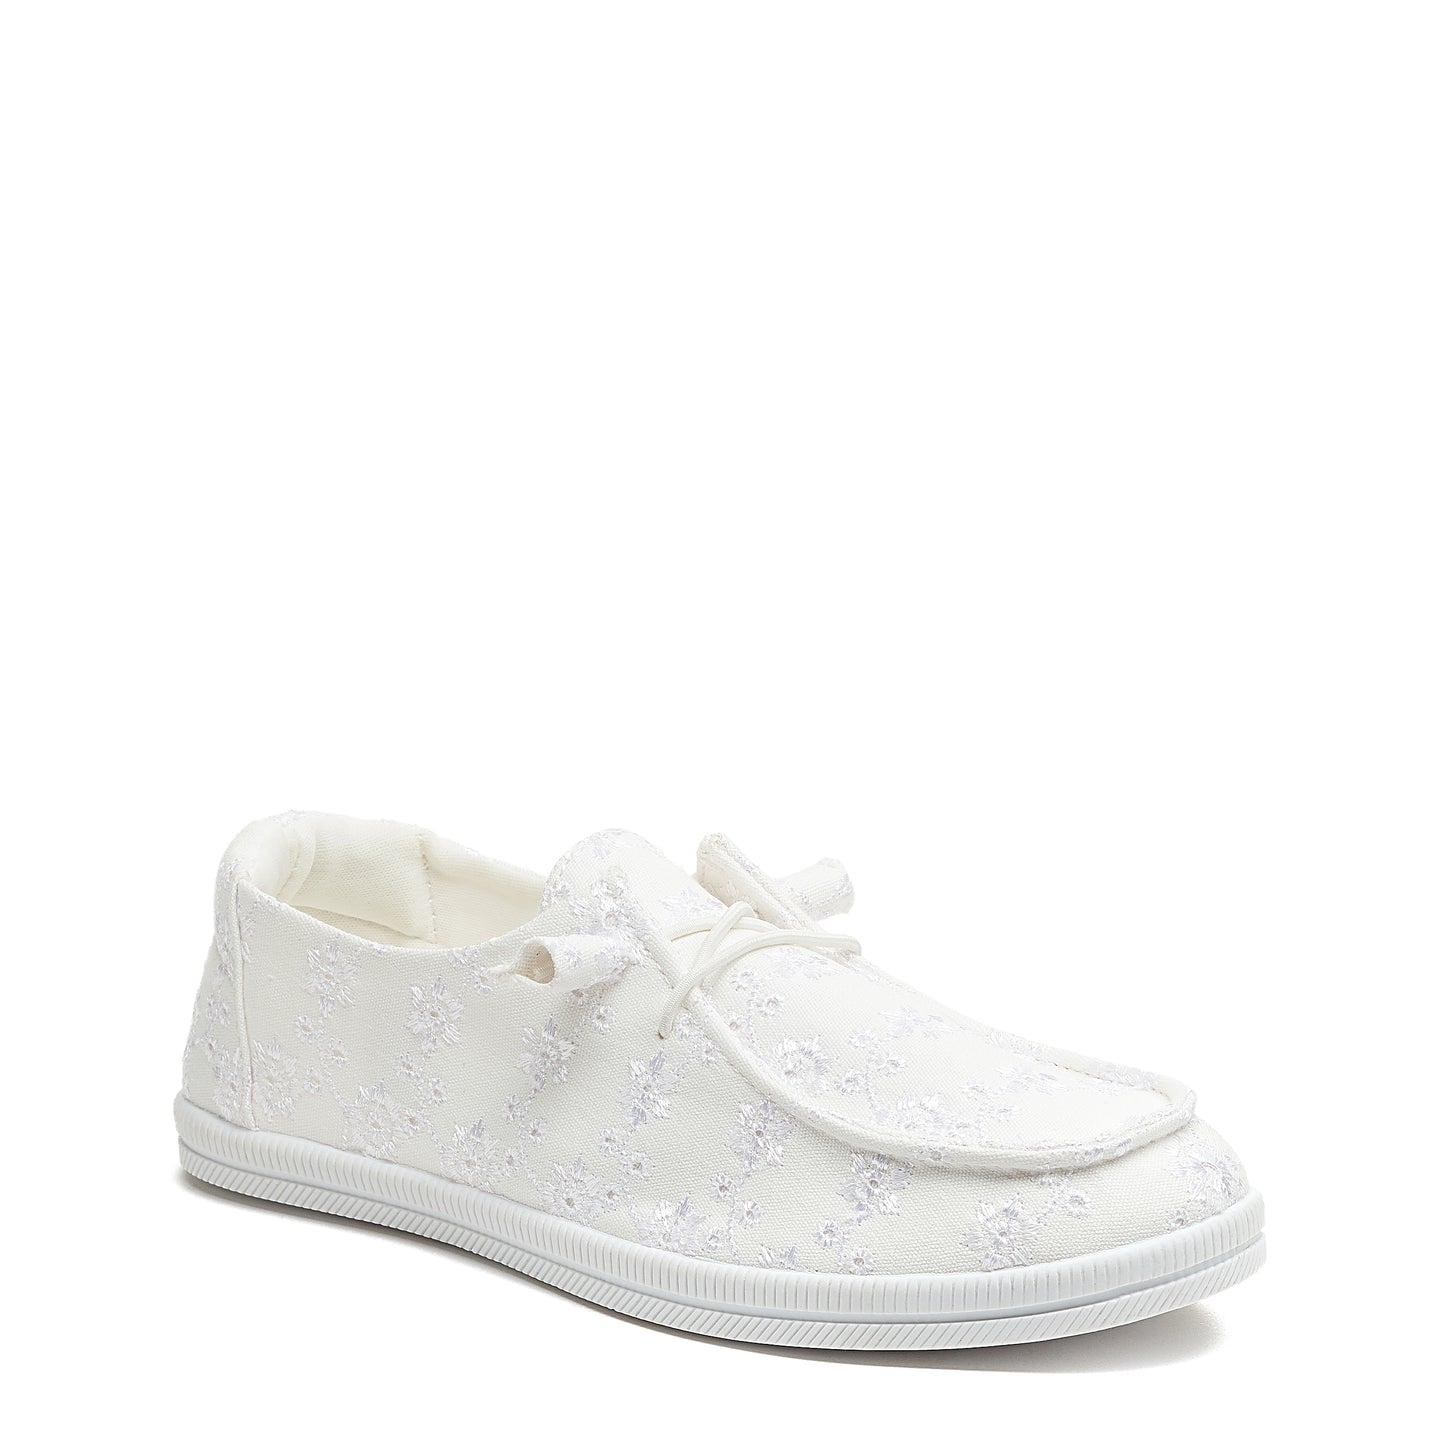 Mellow White Floral Eyelet Slip-On Casual Shoes